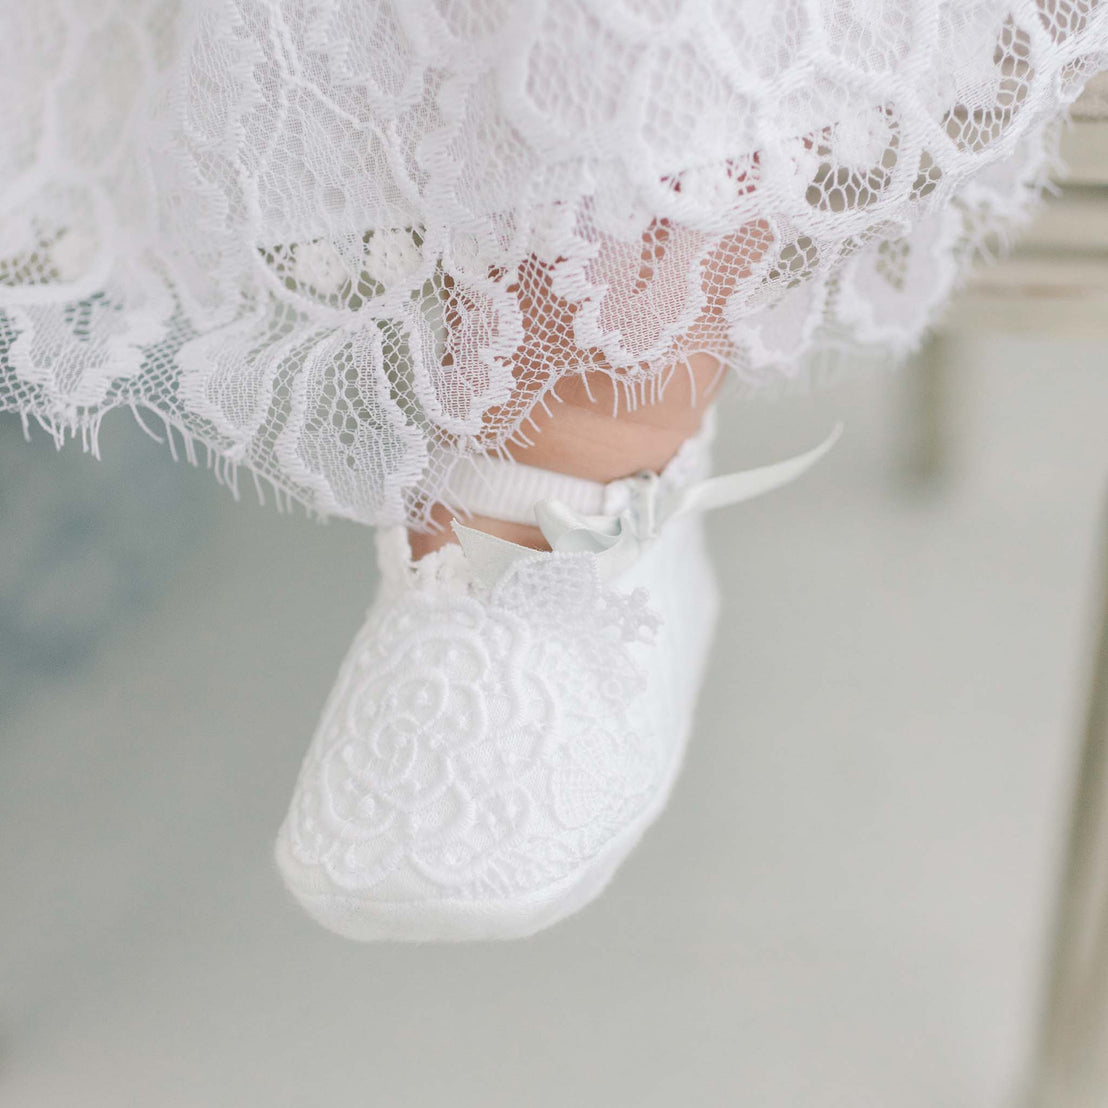 A close-up of a baby's foot adorned with a white, lace-trimmed sock and a matching Olivia Booties for a christening.